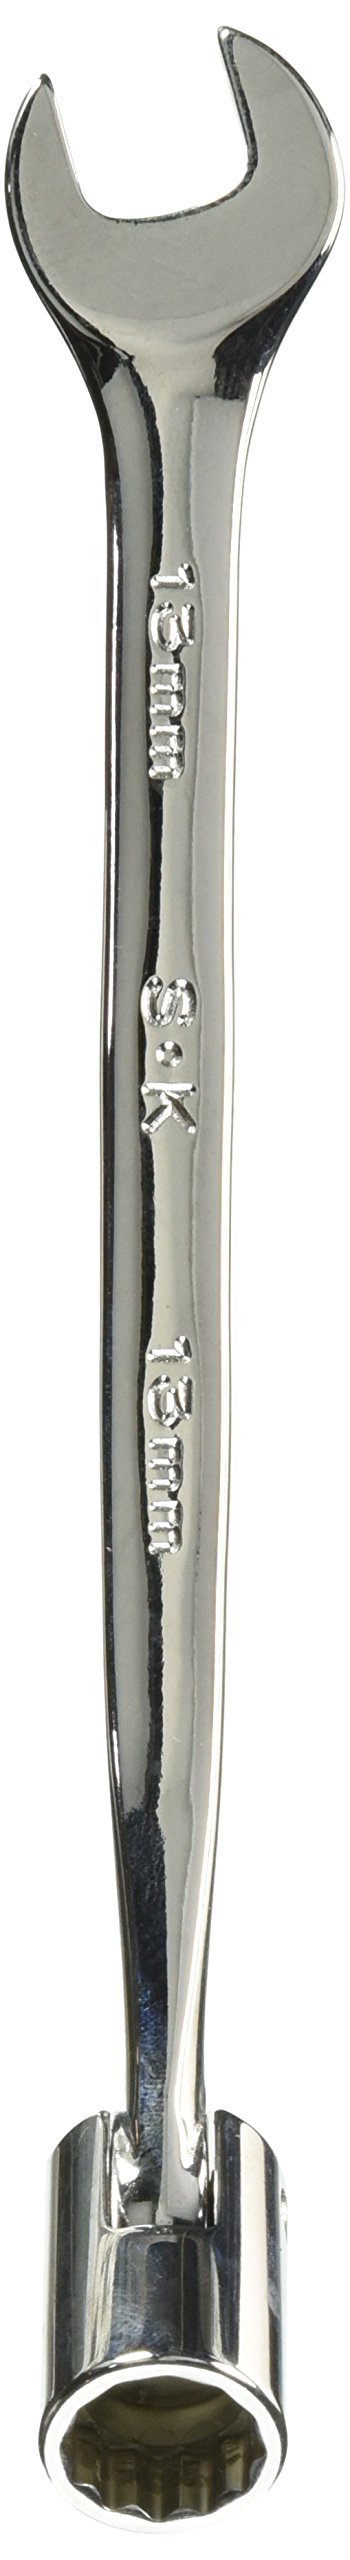 SK Professional Tools 88913 12-Point Fractional Wrench - Standard, 13mm, Flex Combination Chrome Wrench with SuperKrome Finish, Made in USA